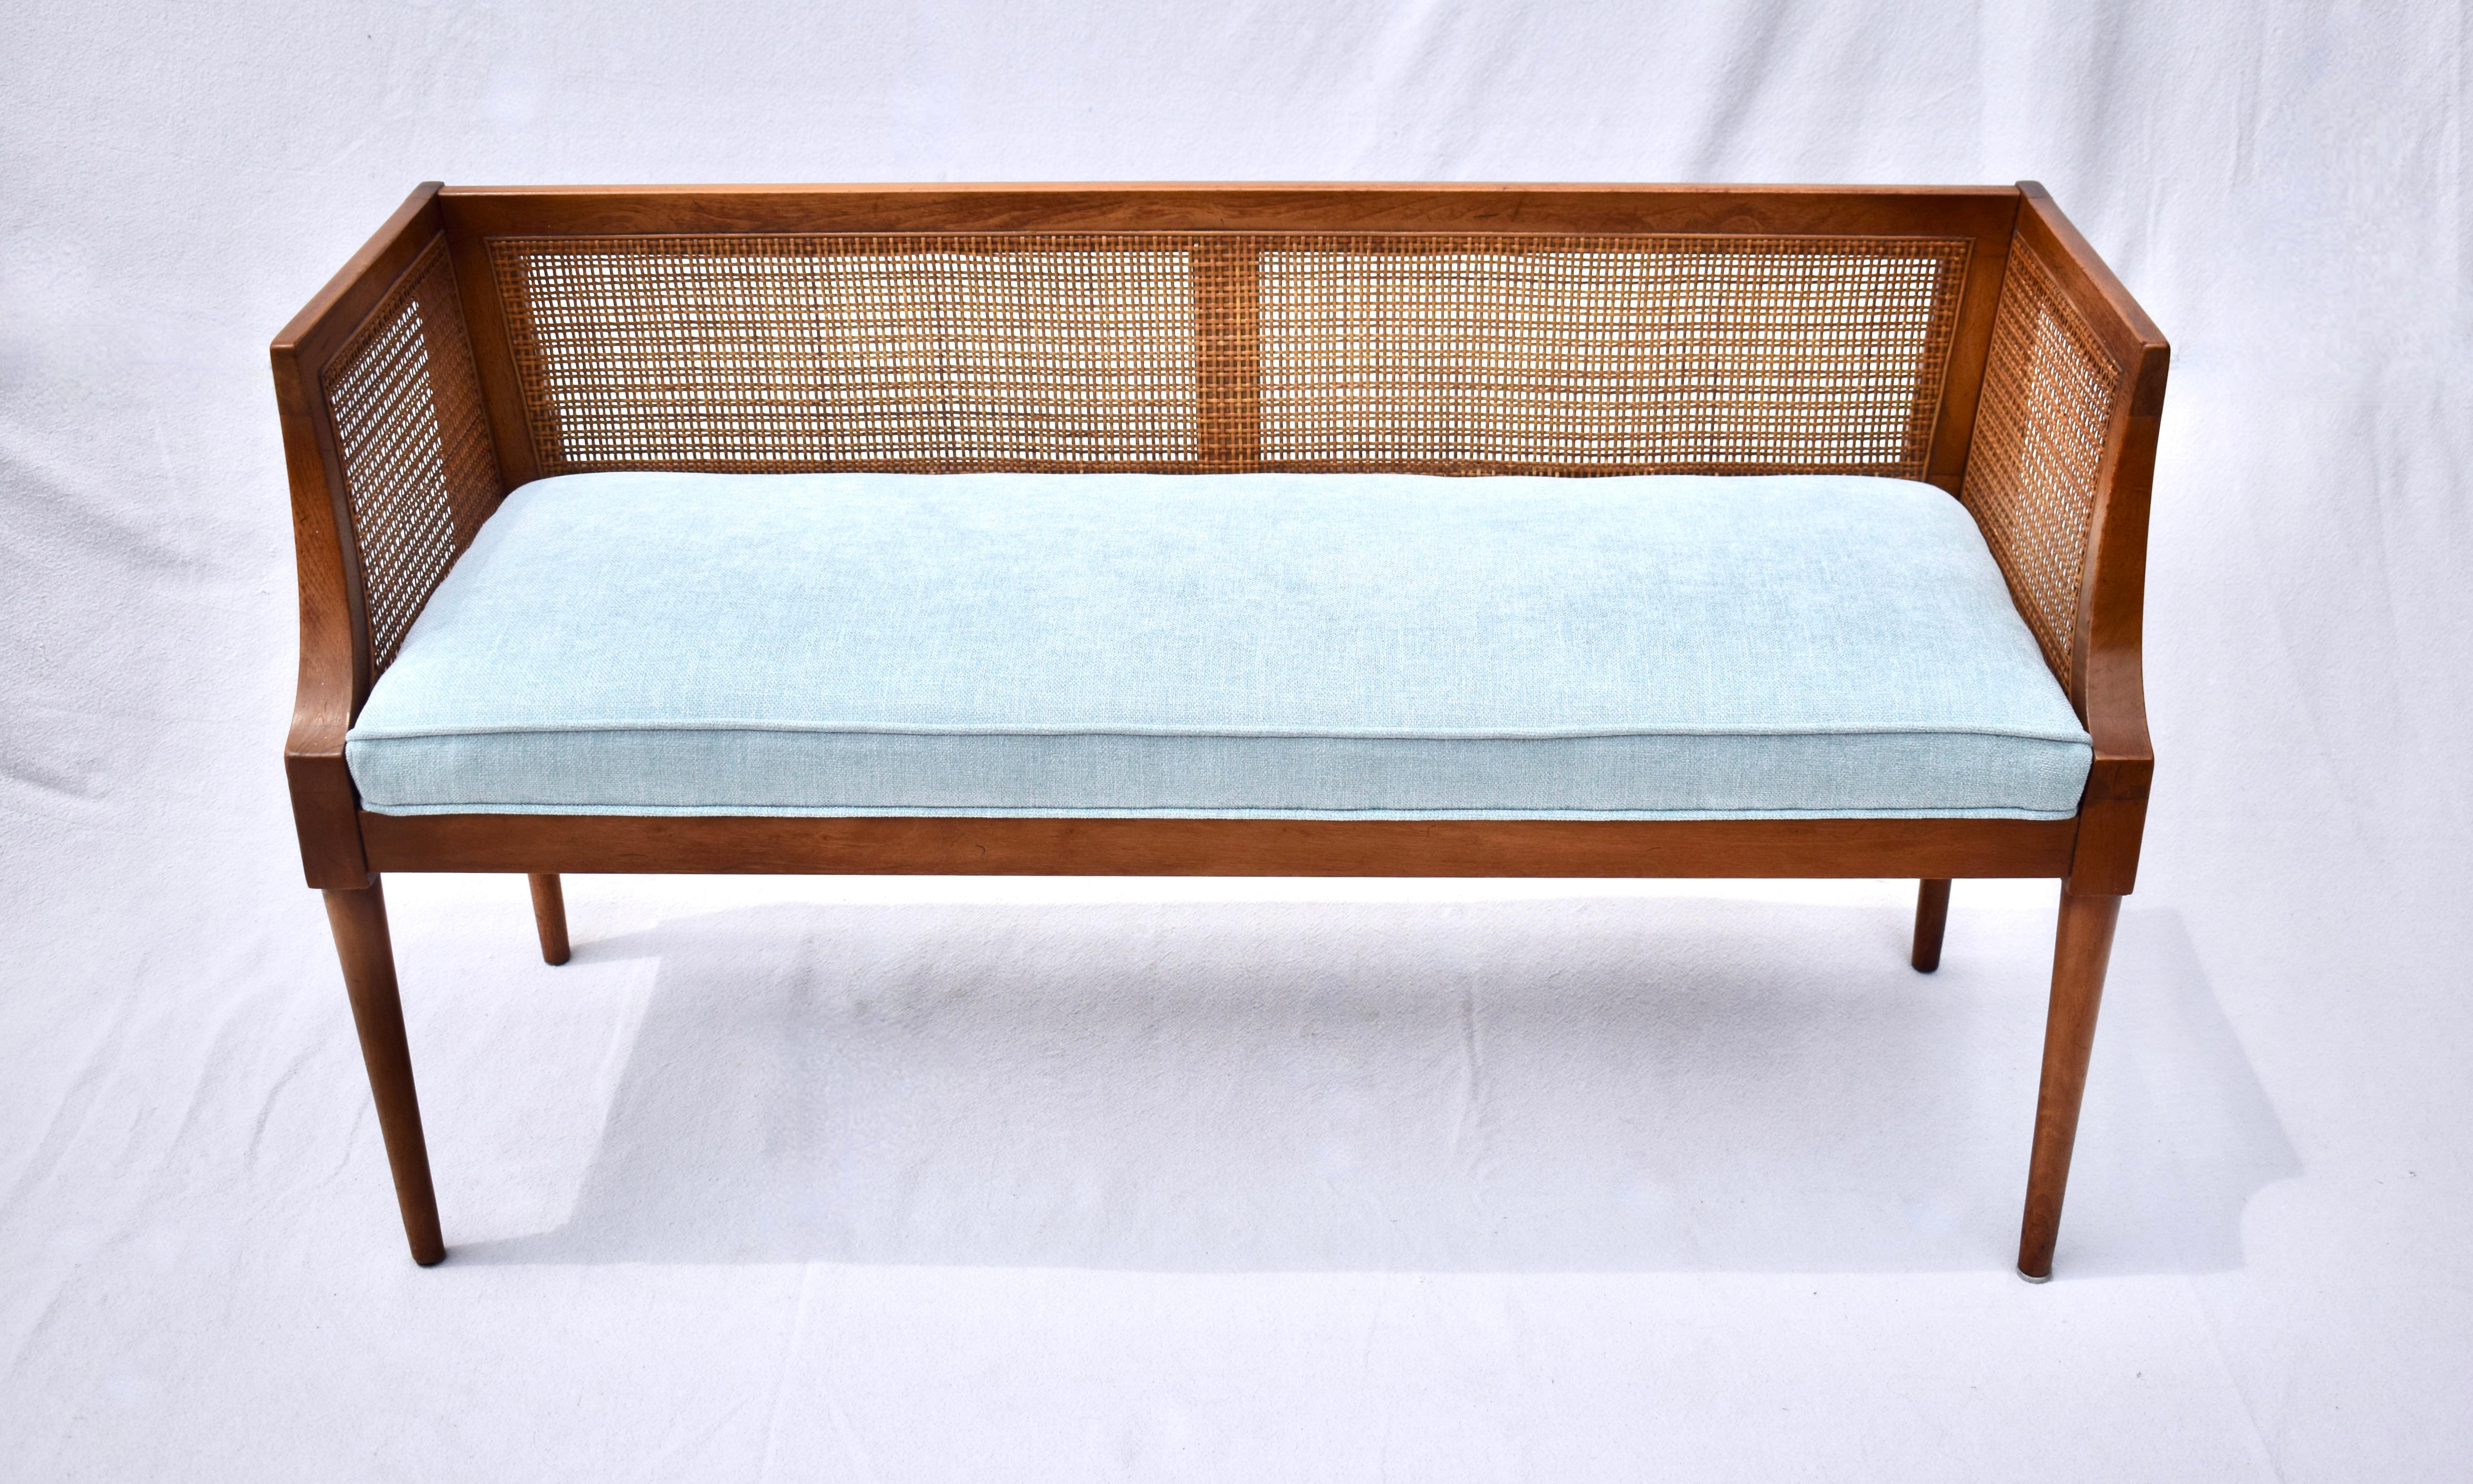 A solid walnut Mid-Century Modern window bench or settee attributed to Edward Wormley for Dunbar. Lithe lines with swag arm design features original fine scale caning & new seat cushion upholstered in soft blue cotton Chenille.